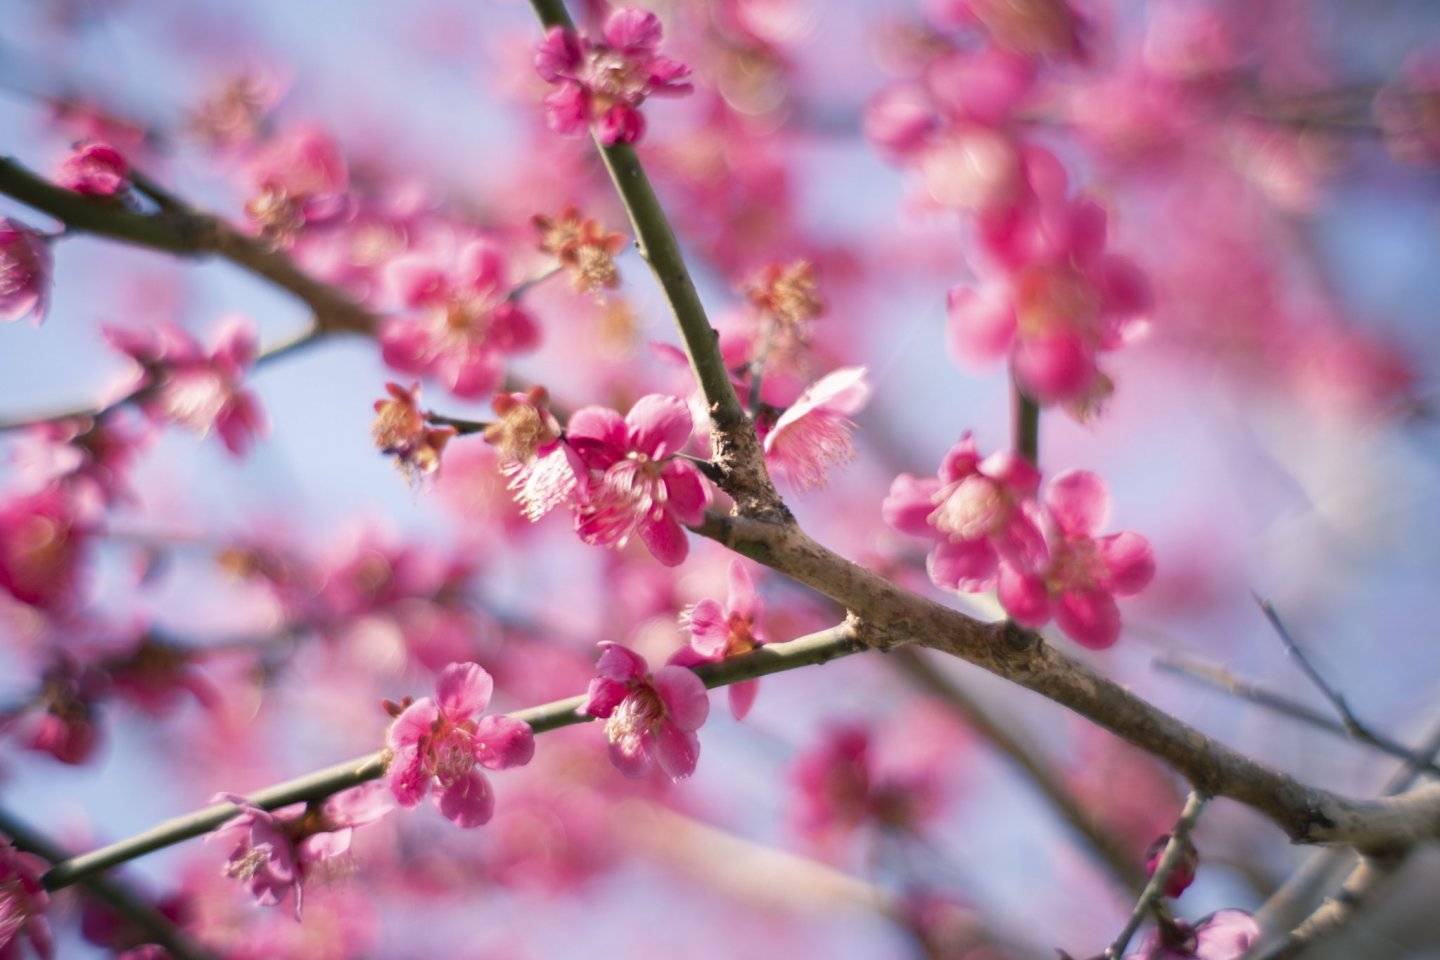 Plum blossoms are a highlight of early spring in Japan